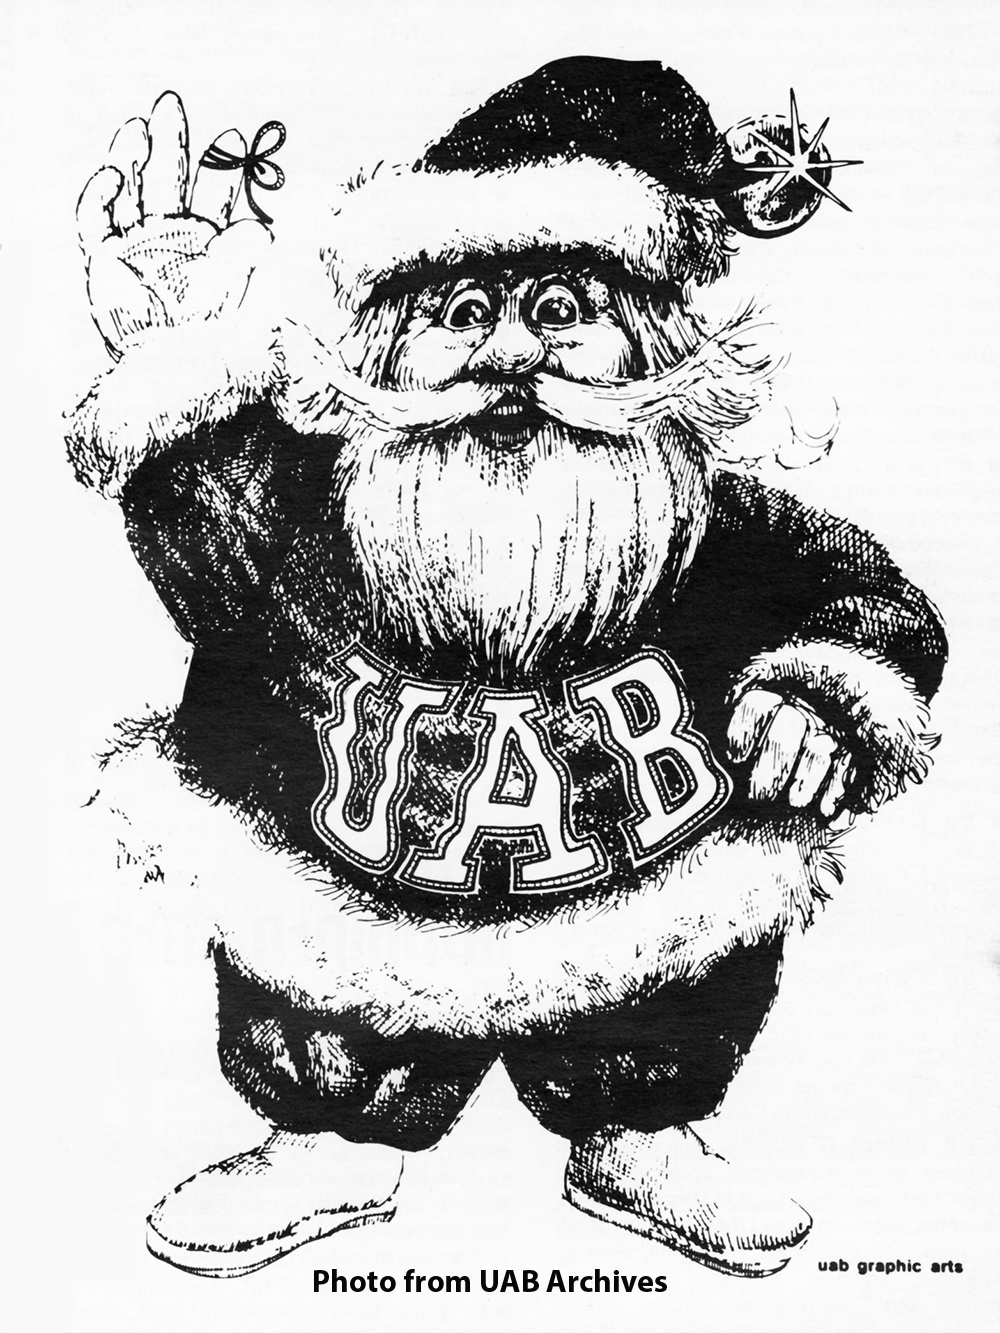 Dressed in a special UAB suit, Santa Claus wishes everyone on campus a happy holiday season